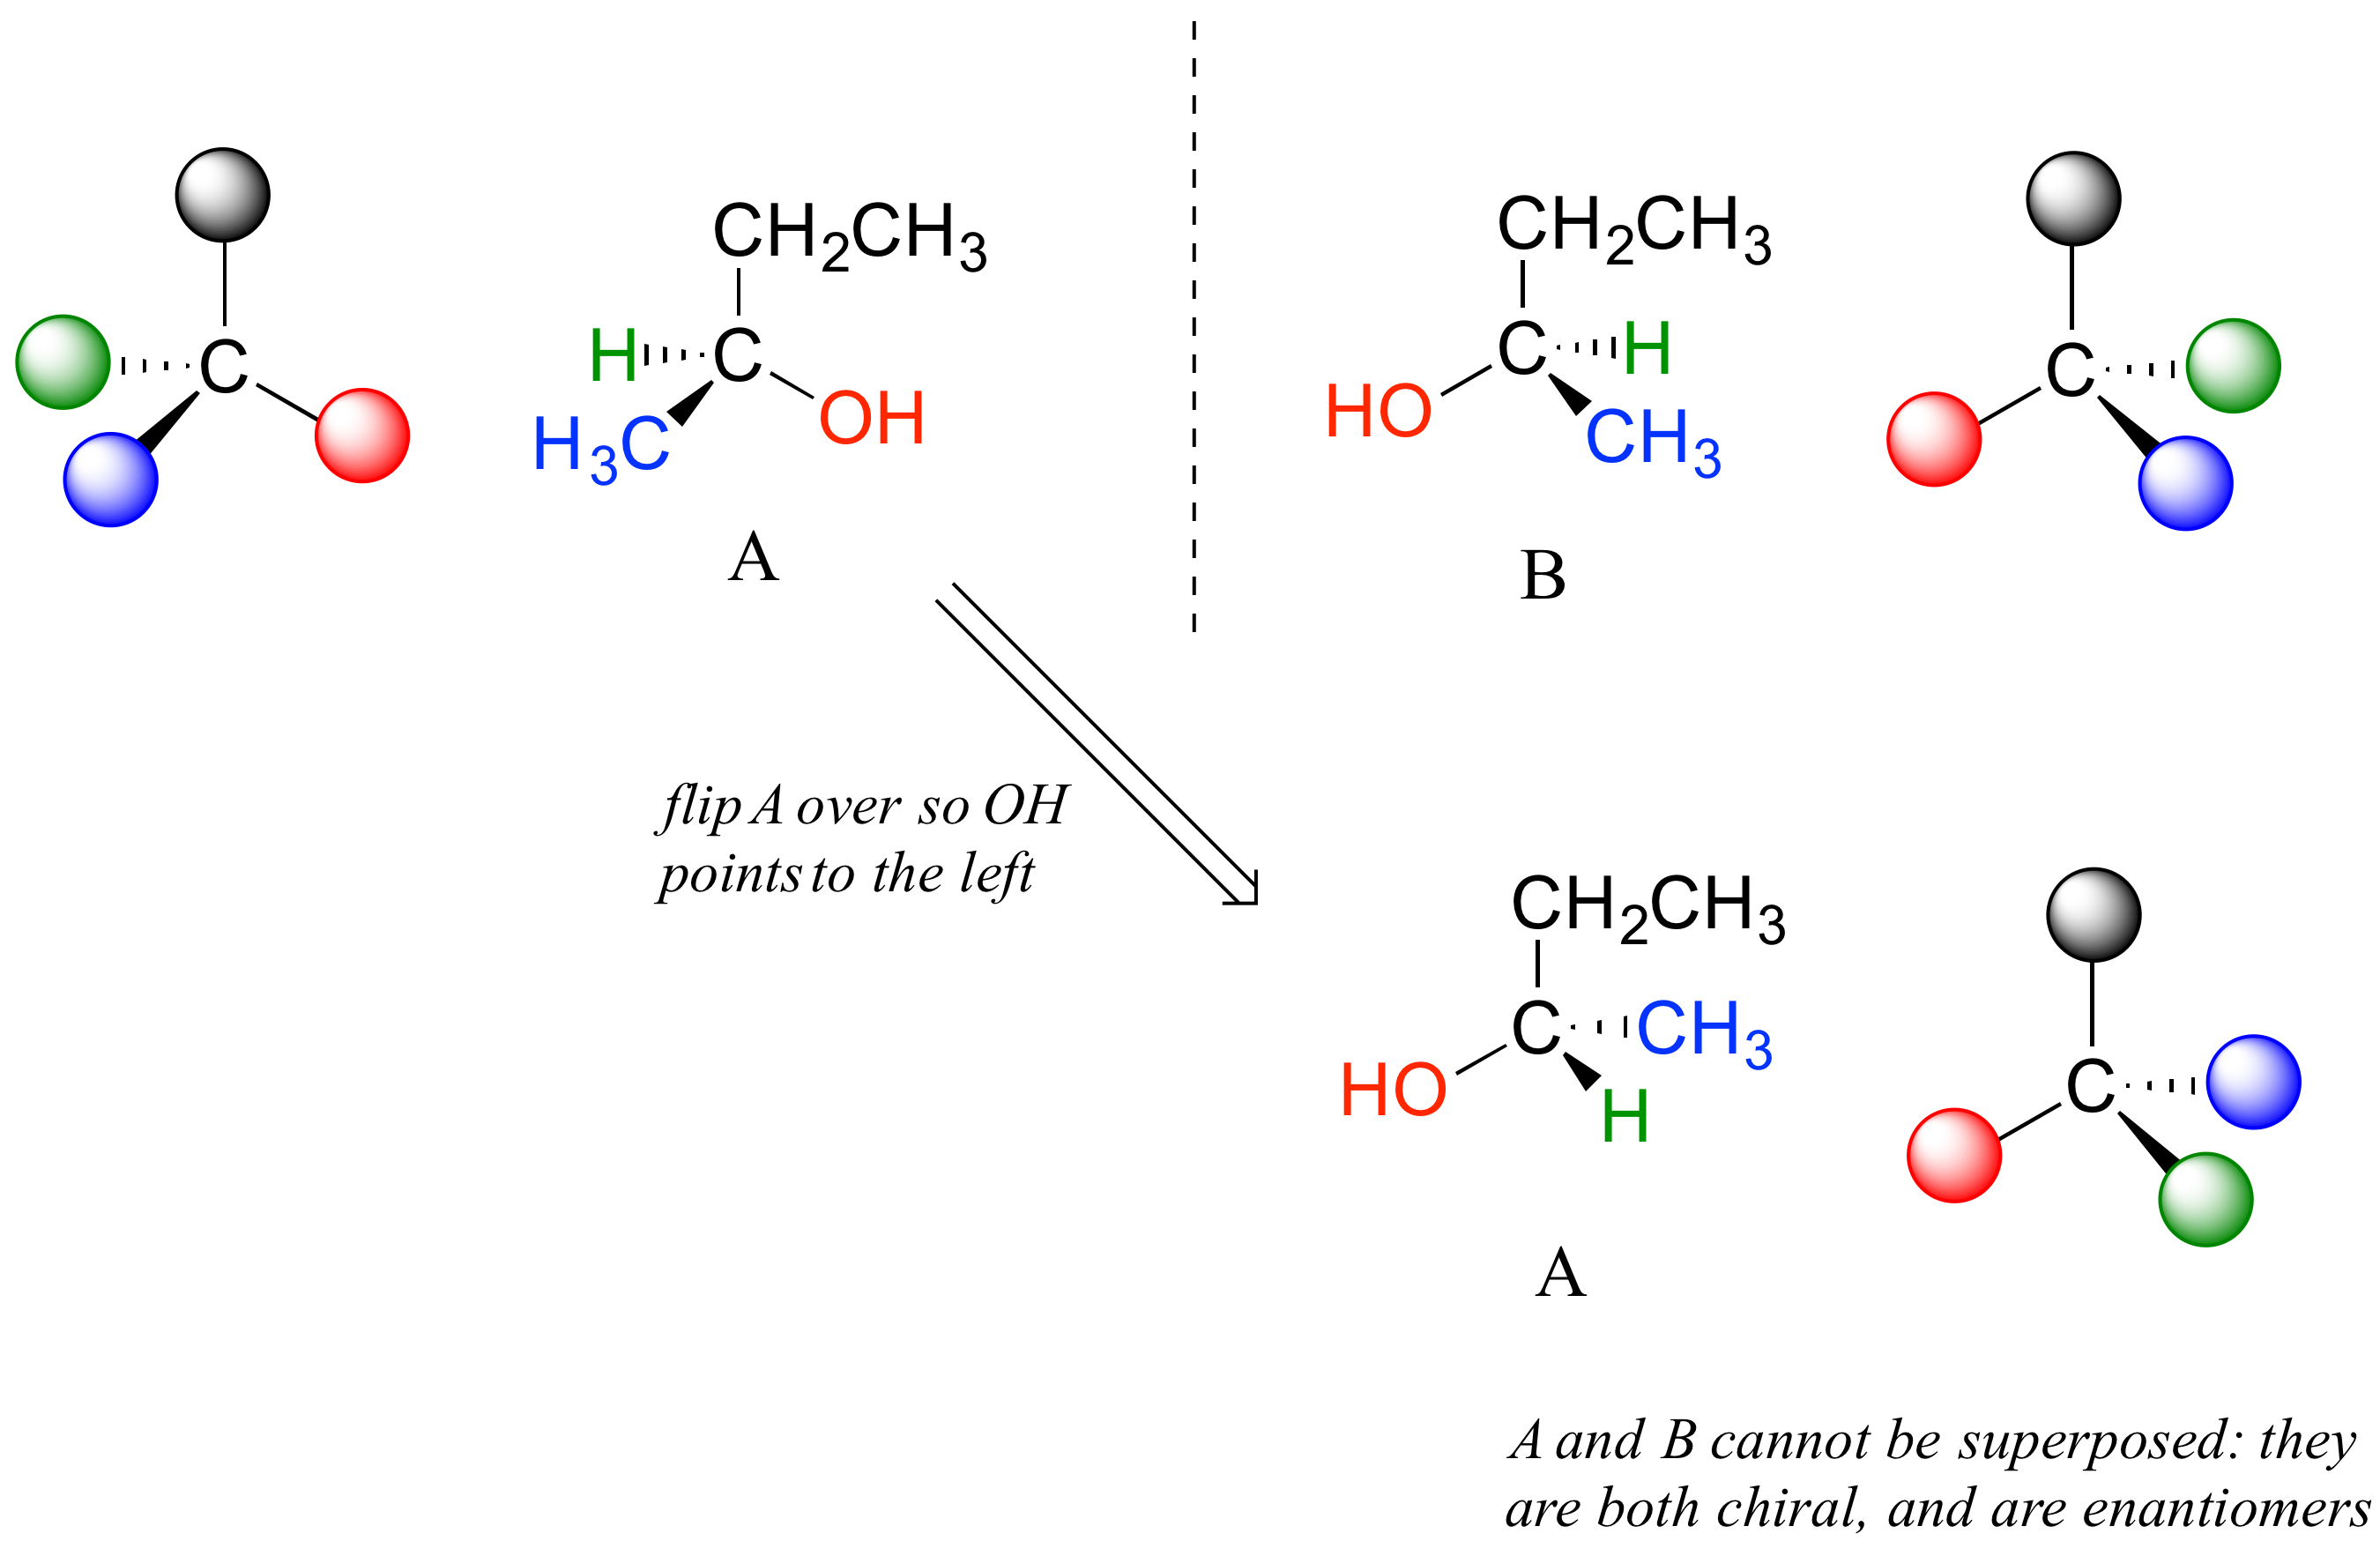 Structure A shows carbon 2 of 2-butanol connected by regular lines to OH (to the right) and to CH2CH3 (above), by a solid wedge to CH3 and by a dashed line to H (both to the left). The mirror image is shown, with CH2CH3 above, OH to the left, CH3 and H to the right. Flipping or turning structure A produces a structure which can not be superimposed on B, therefore A and B are enantiomers.